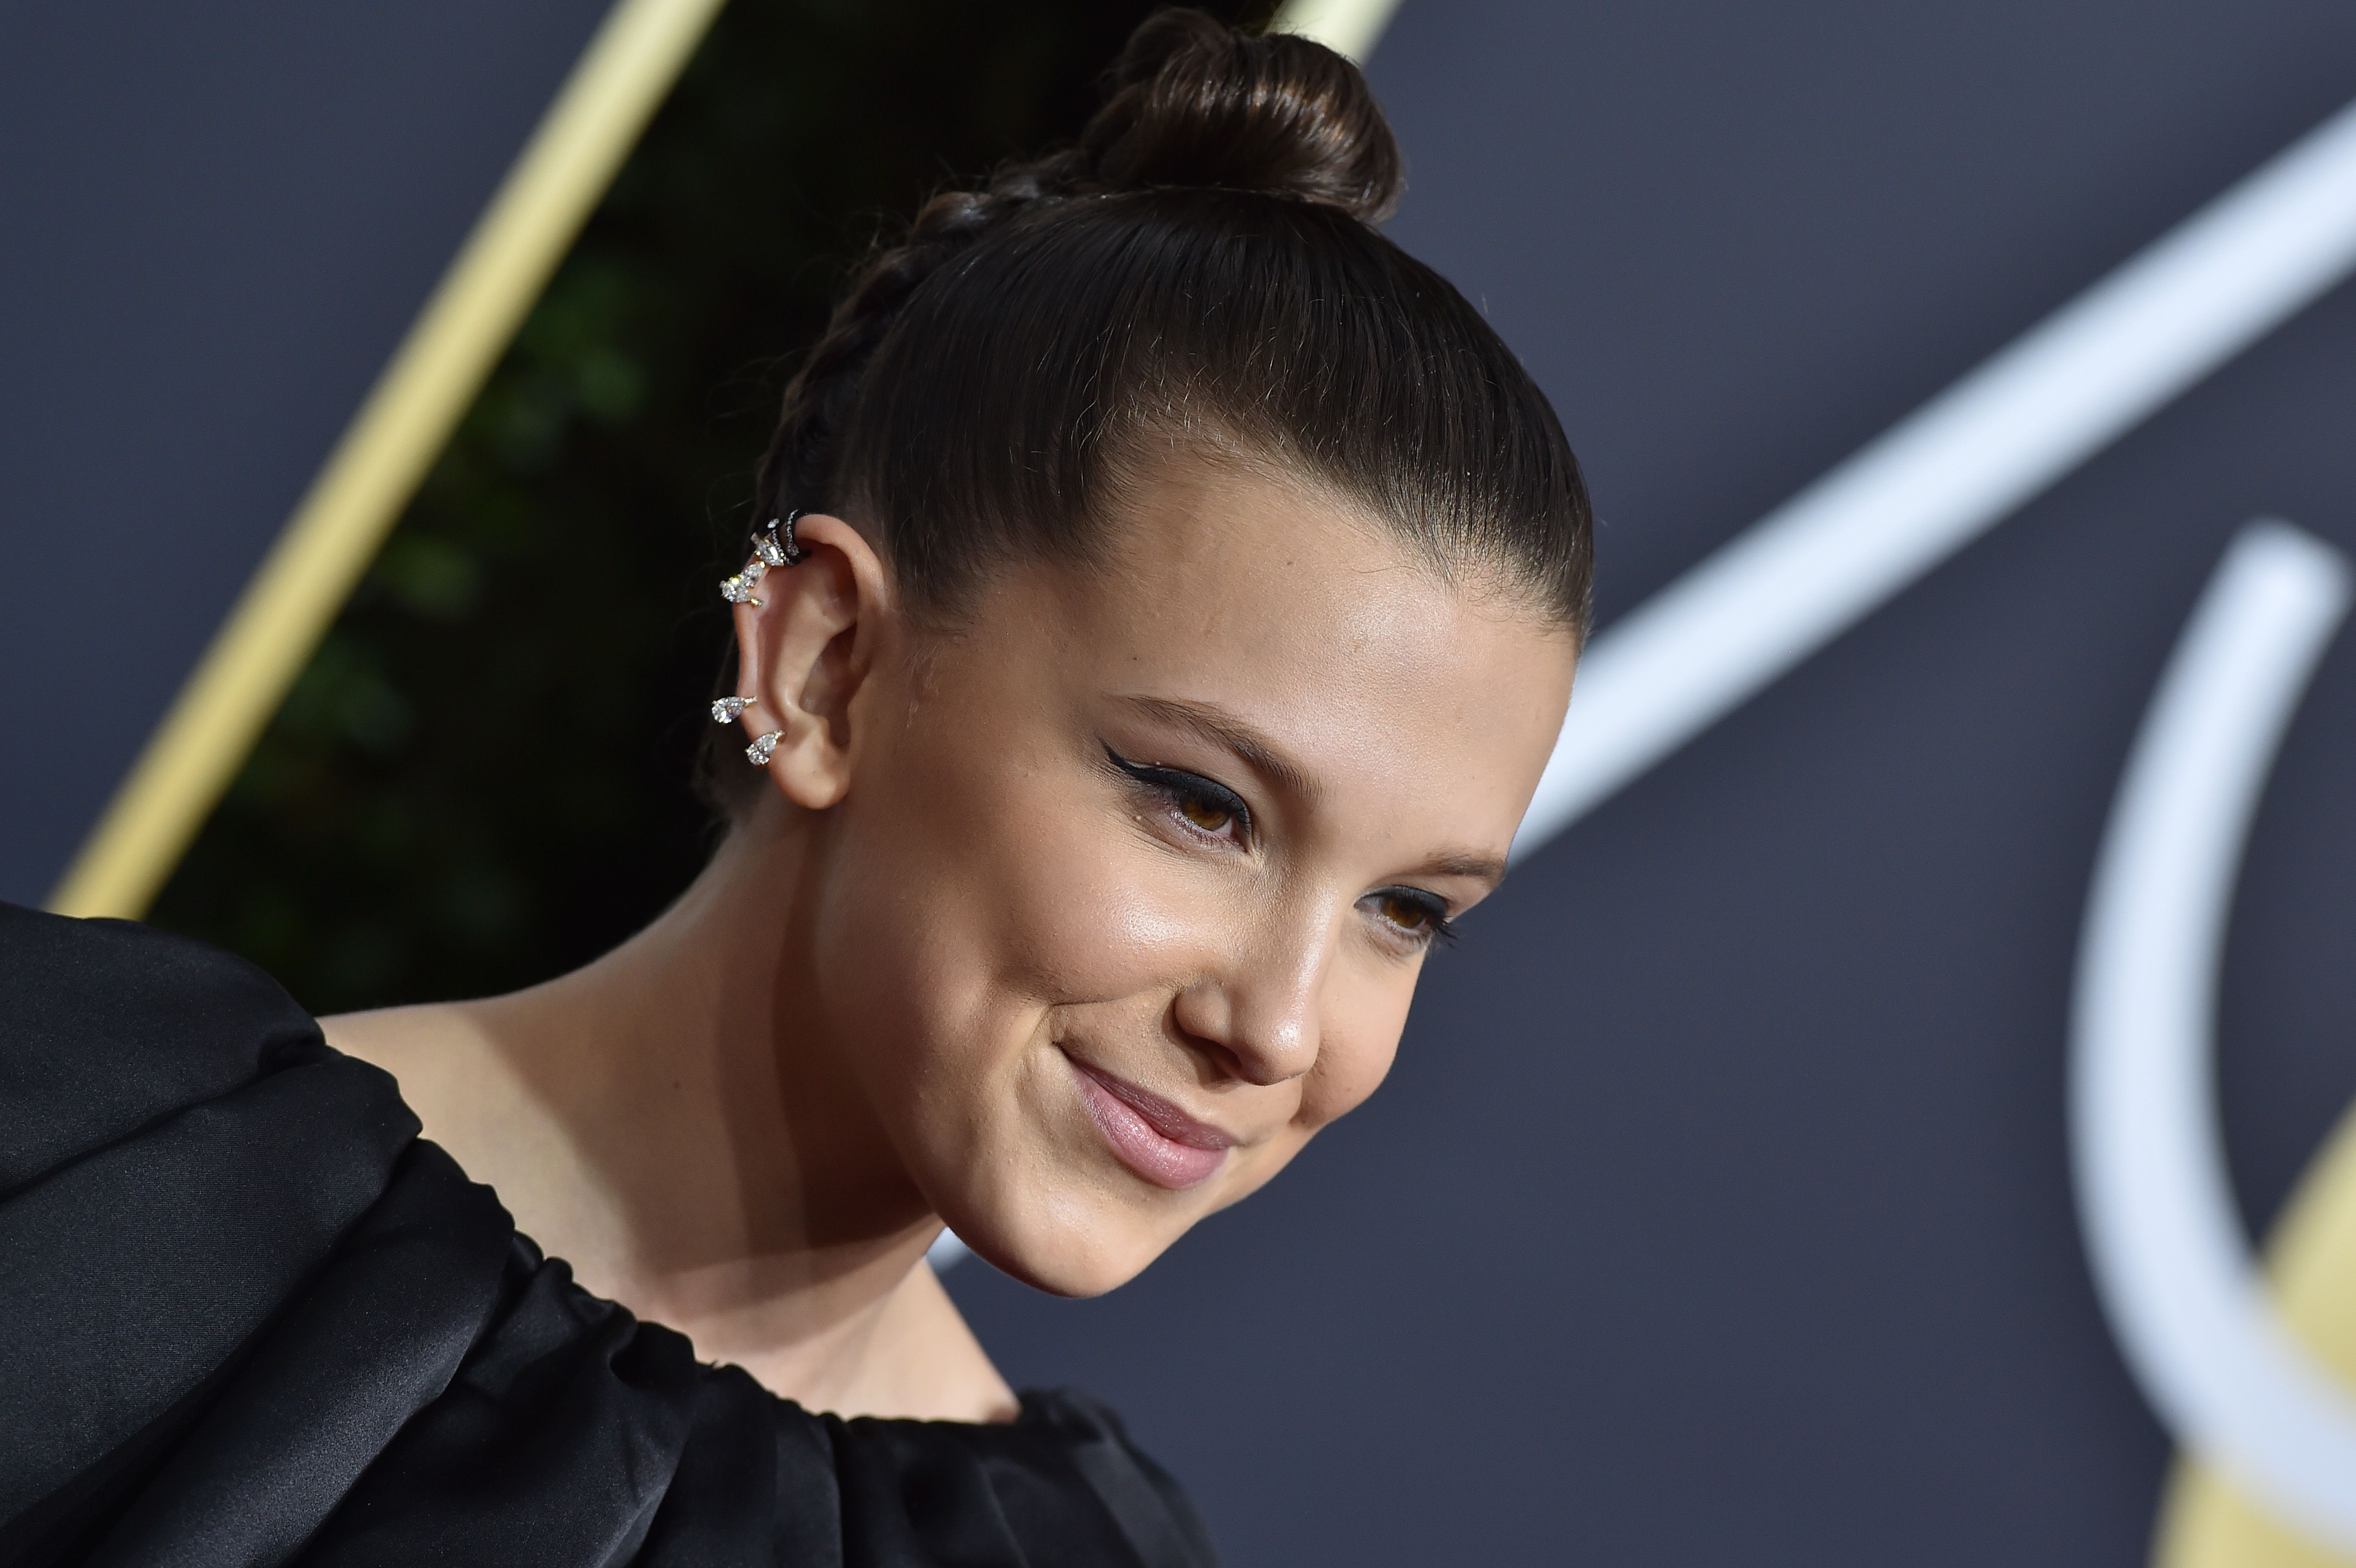 Millie Bobby Brown Wallpaper High Quality